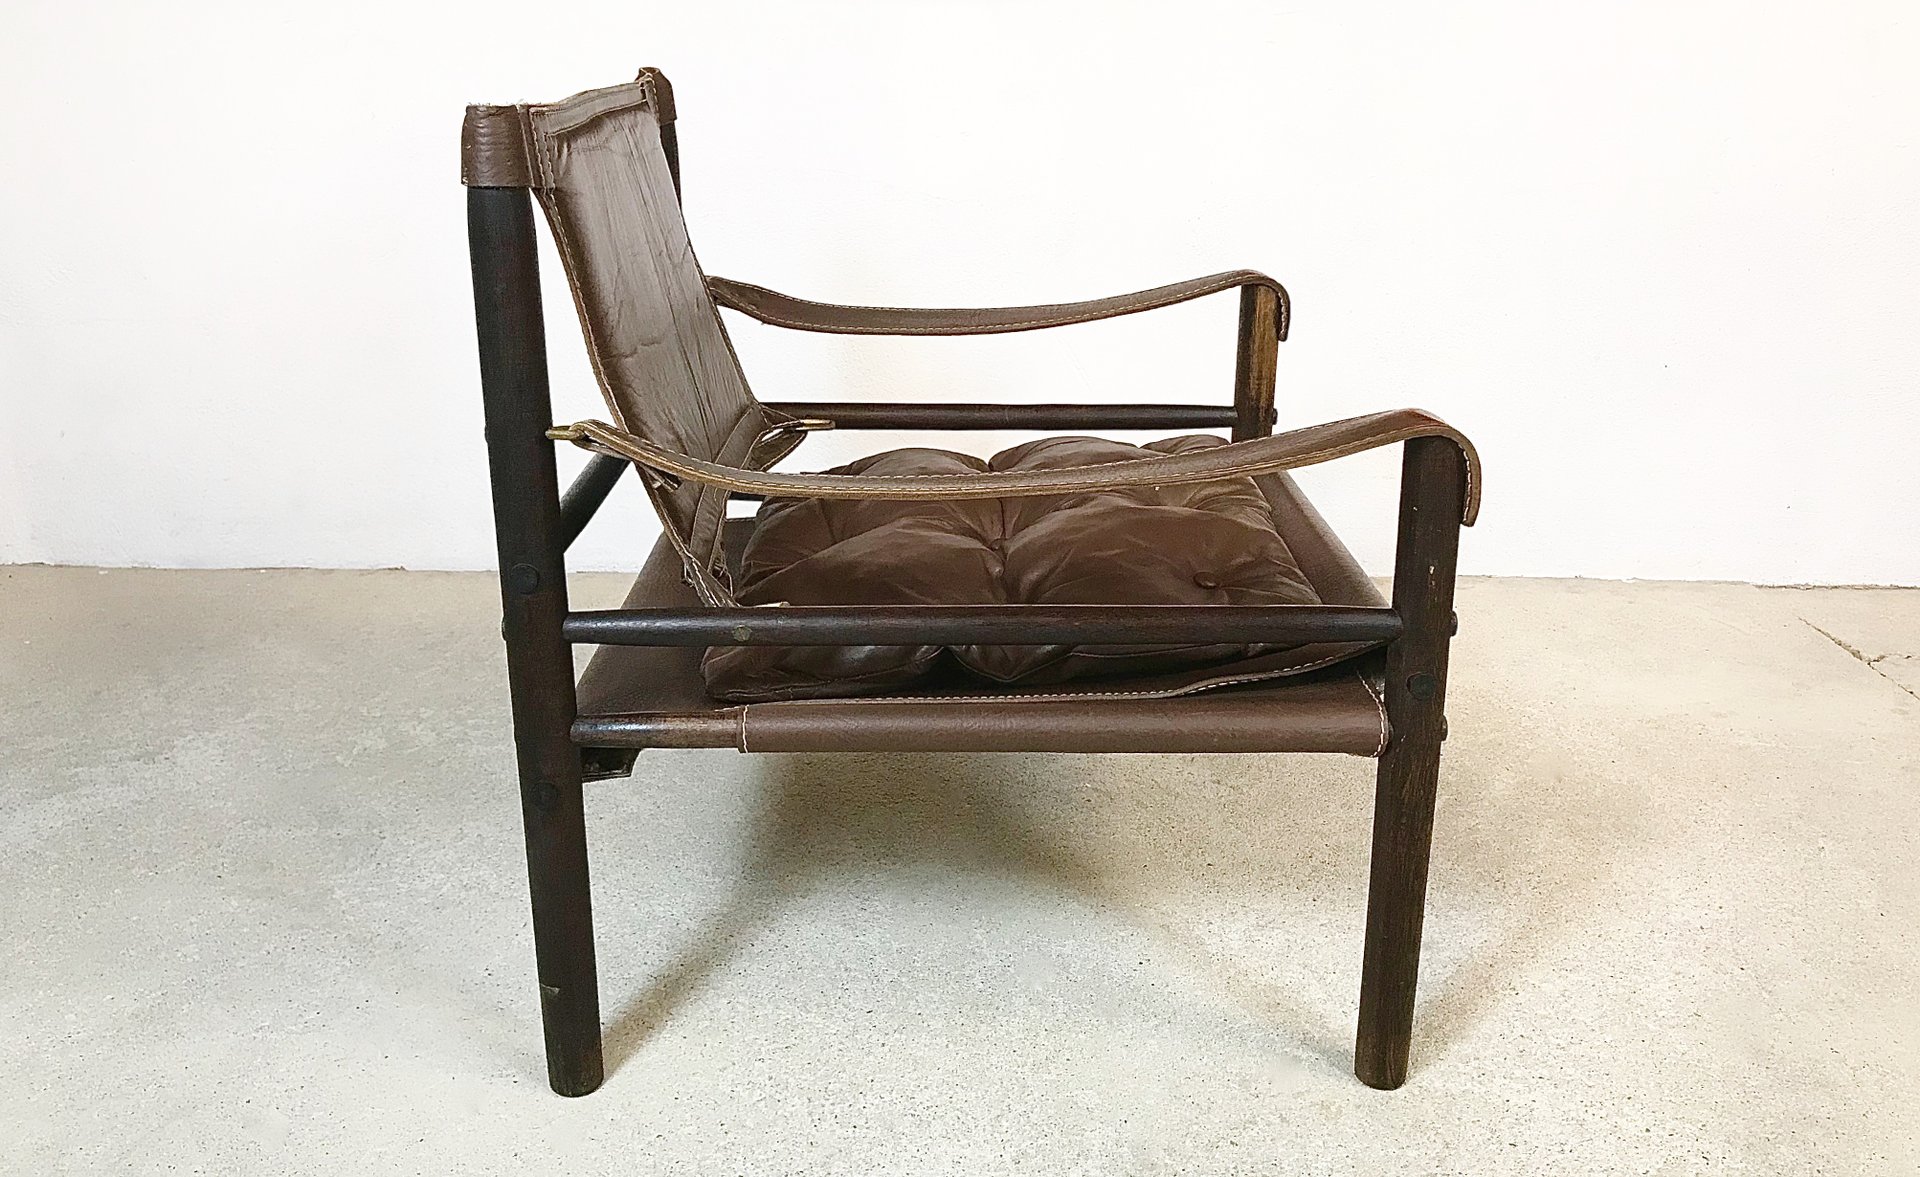 Sirocco Leather Safari Chair by Arne Norell, 1960s for